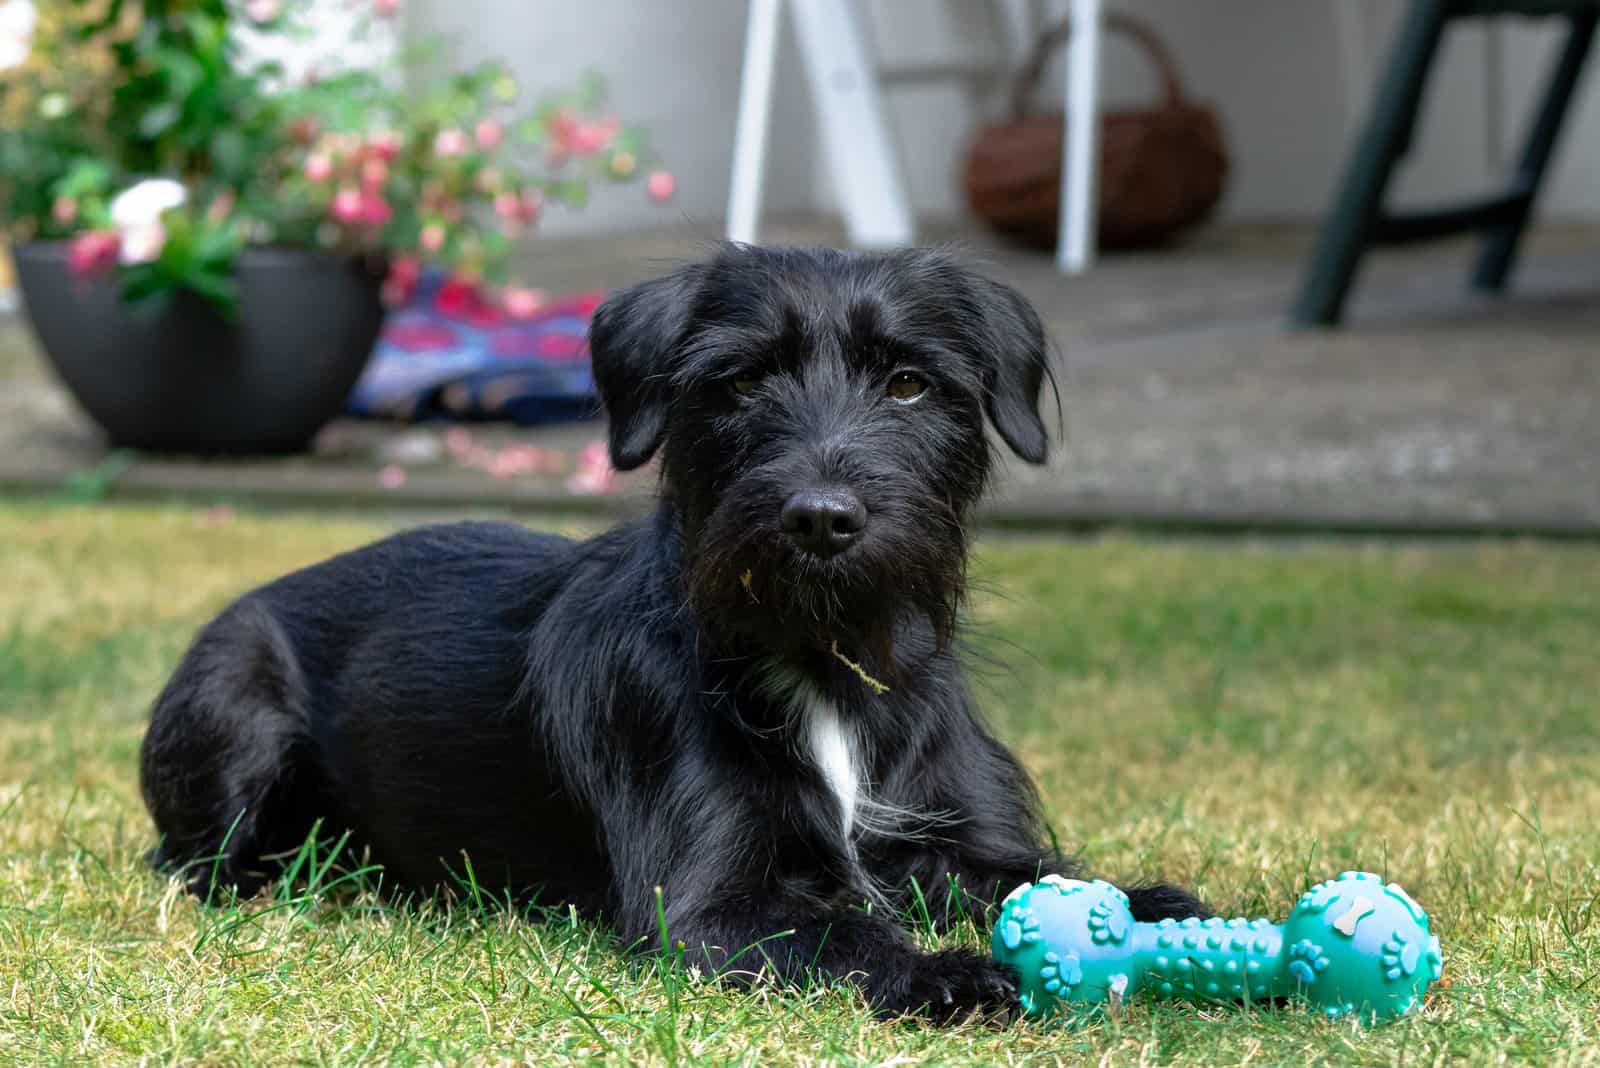 Miniature Schnauzer Dog on lawn looking at camera with toy